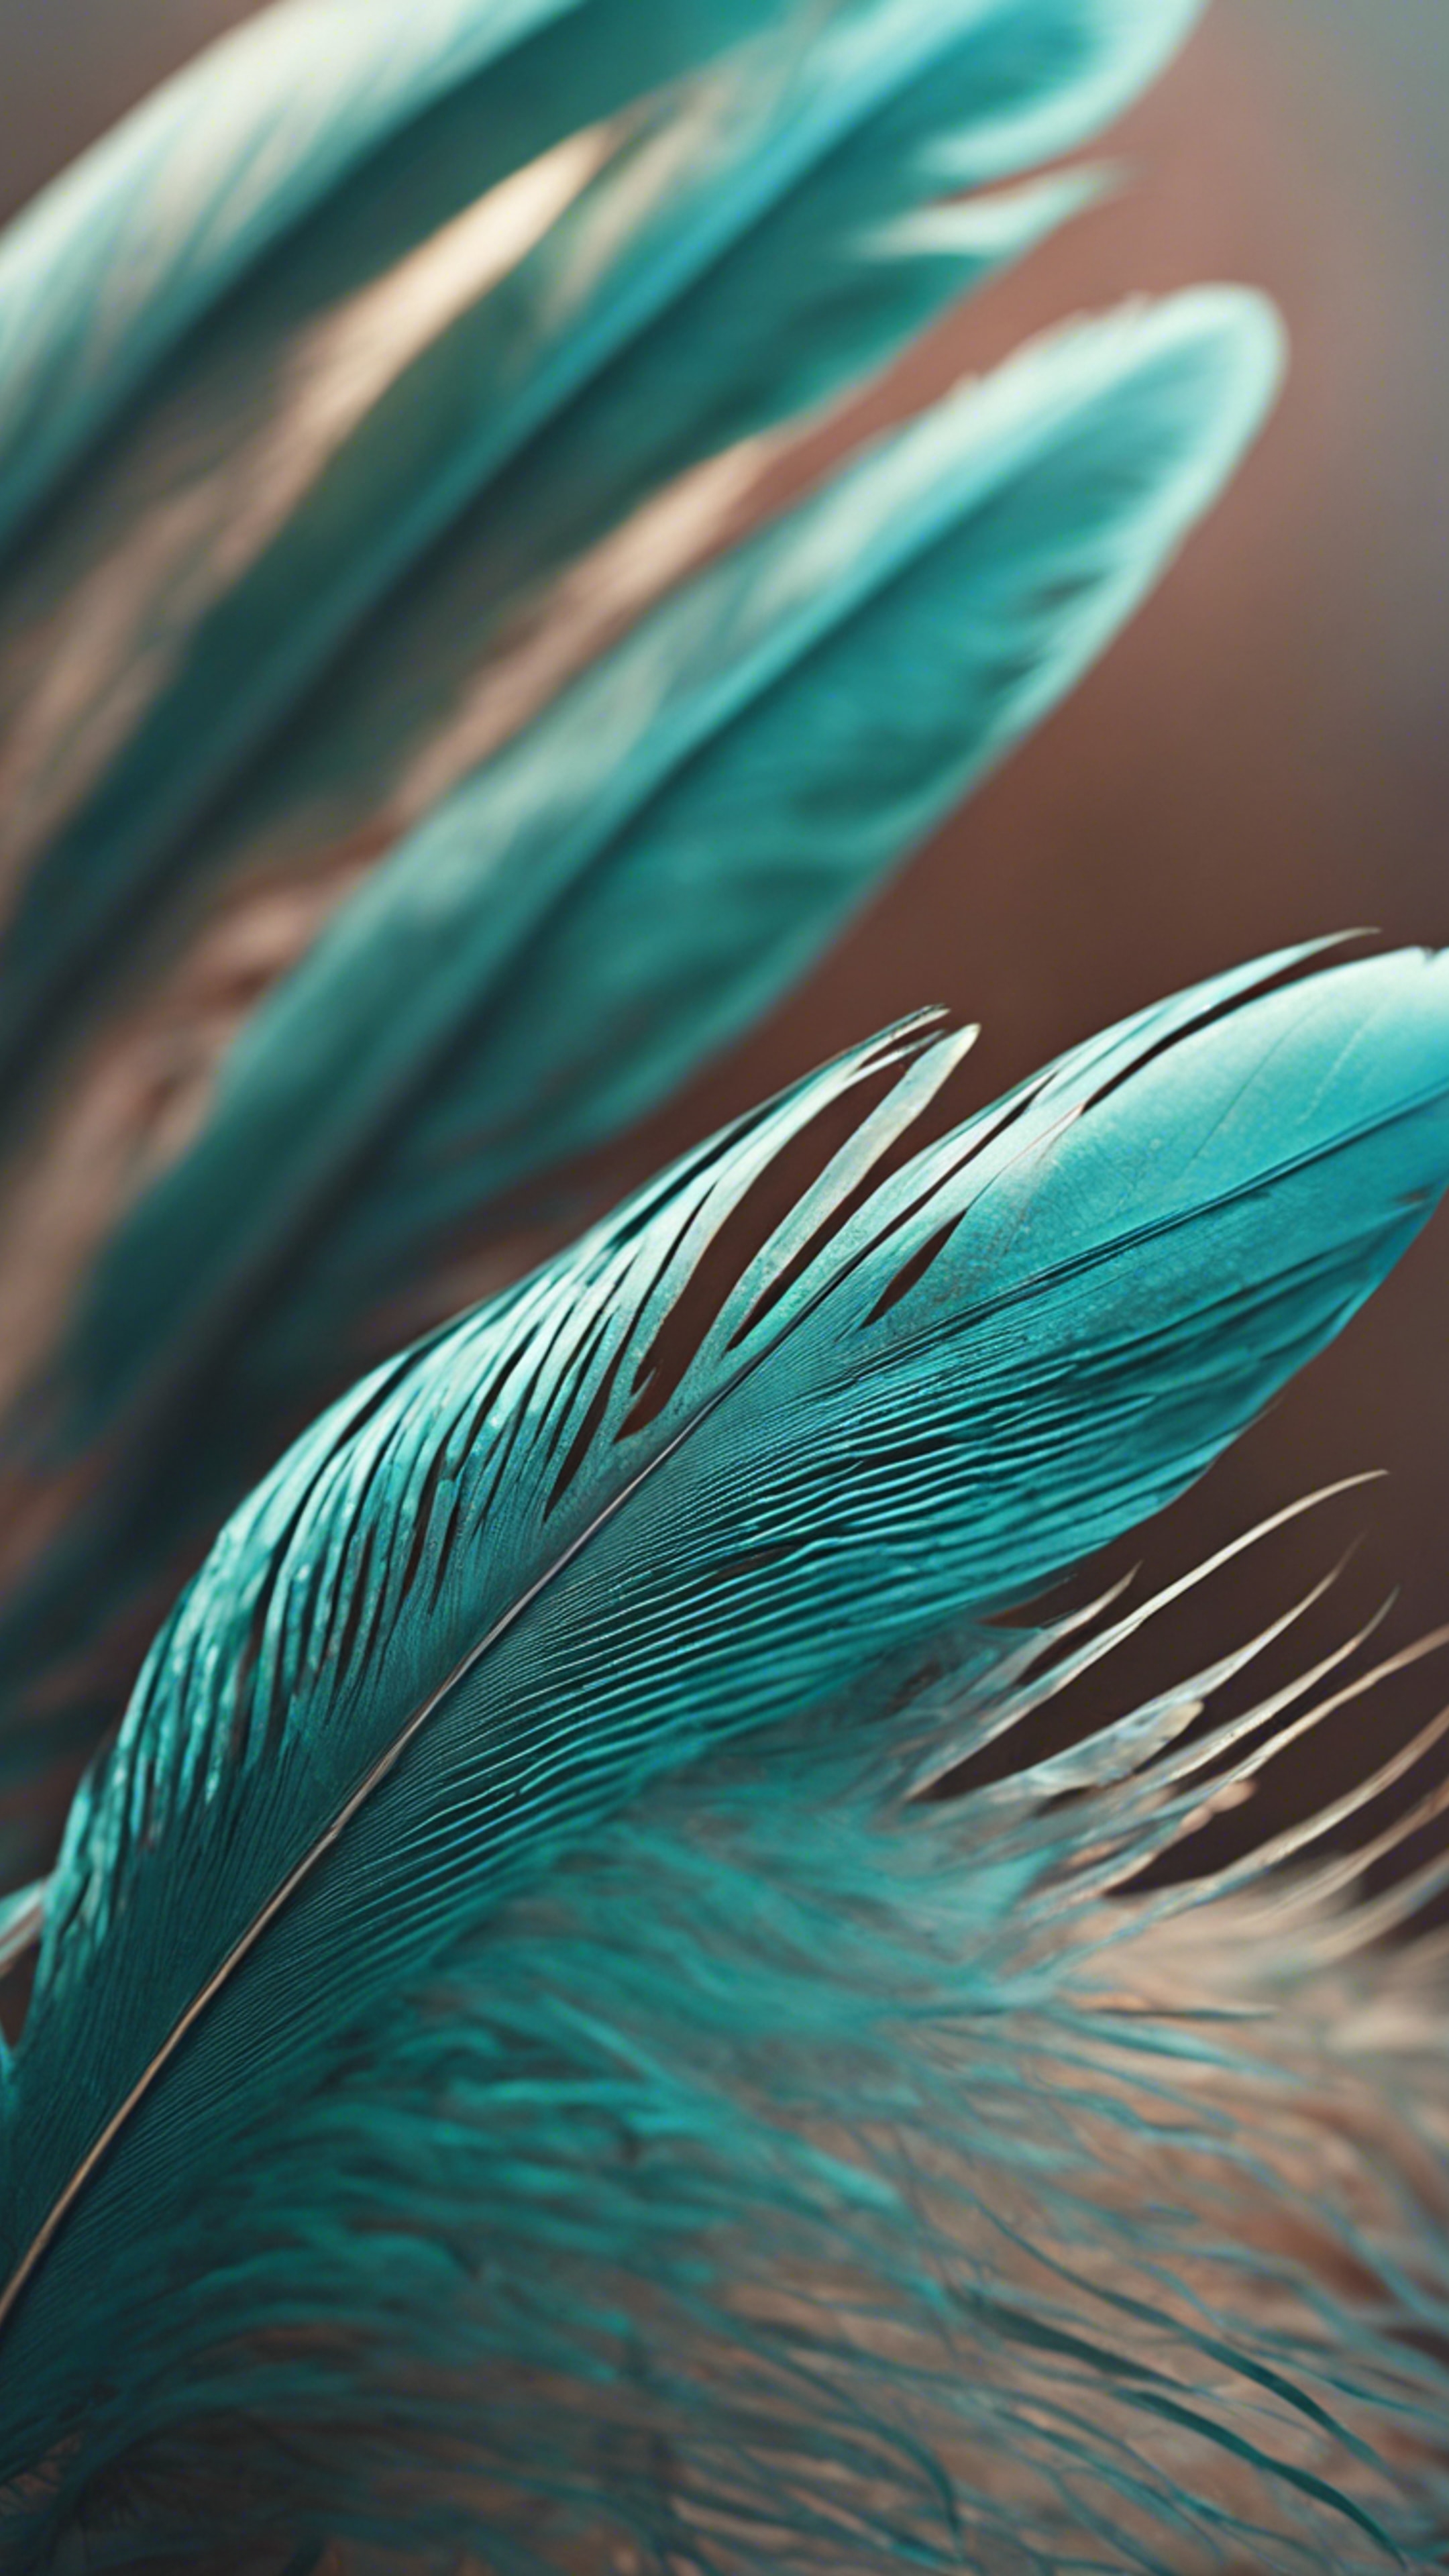 A close-up view of an exotic cool teal-colored birds' feather.壁紙[44d0beeee9f542d4ae1e]